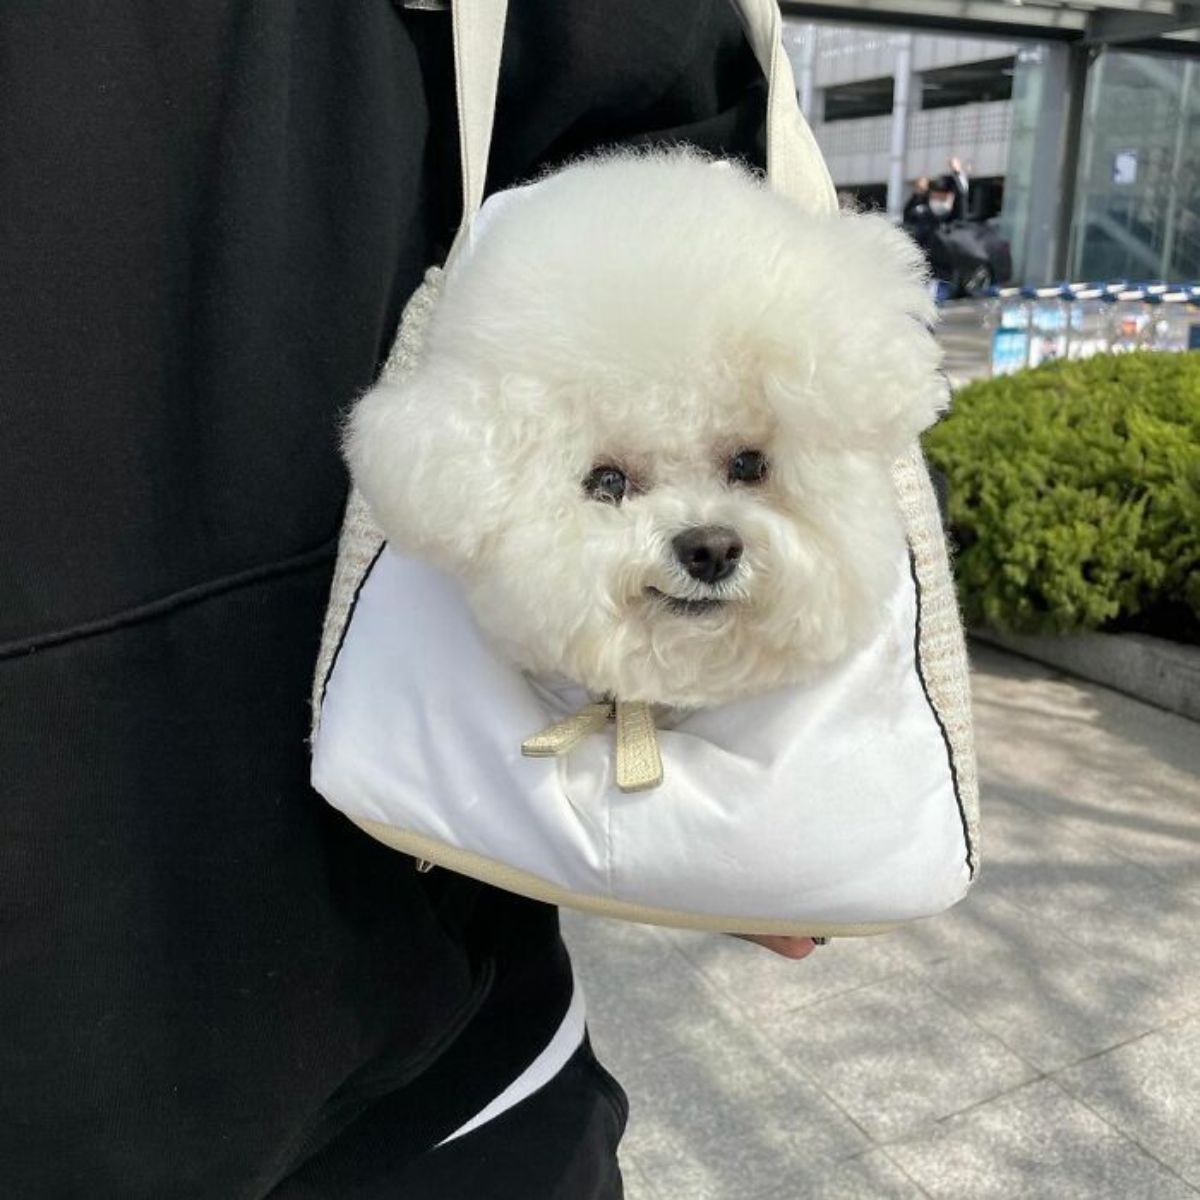 small fluffy white dog in a white and beige bag with the head poking out